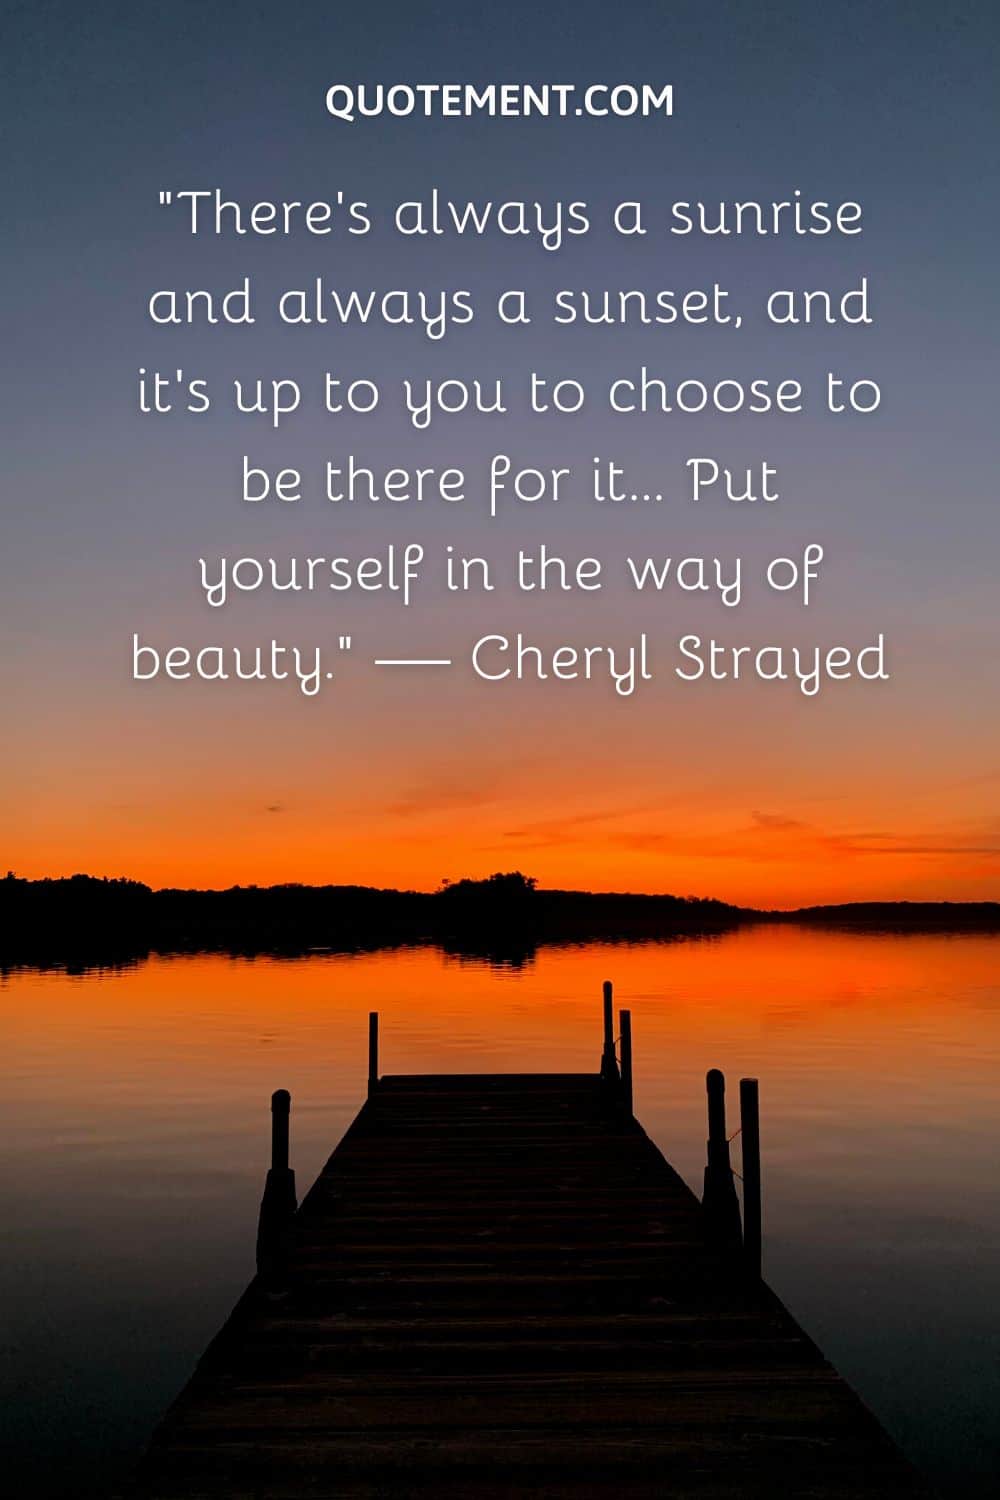 “There’s always a sunrise and always a sunset, and it’s up to you to choose to be there for it… Put yourself in the way of beauty.” — Cheryl Strayed